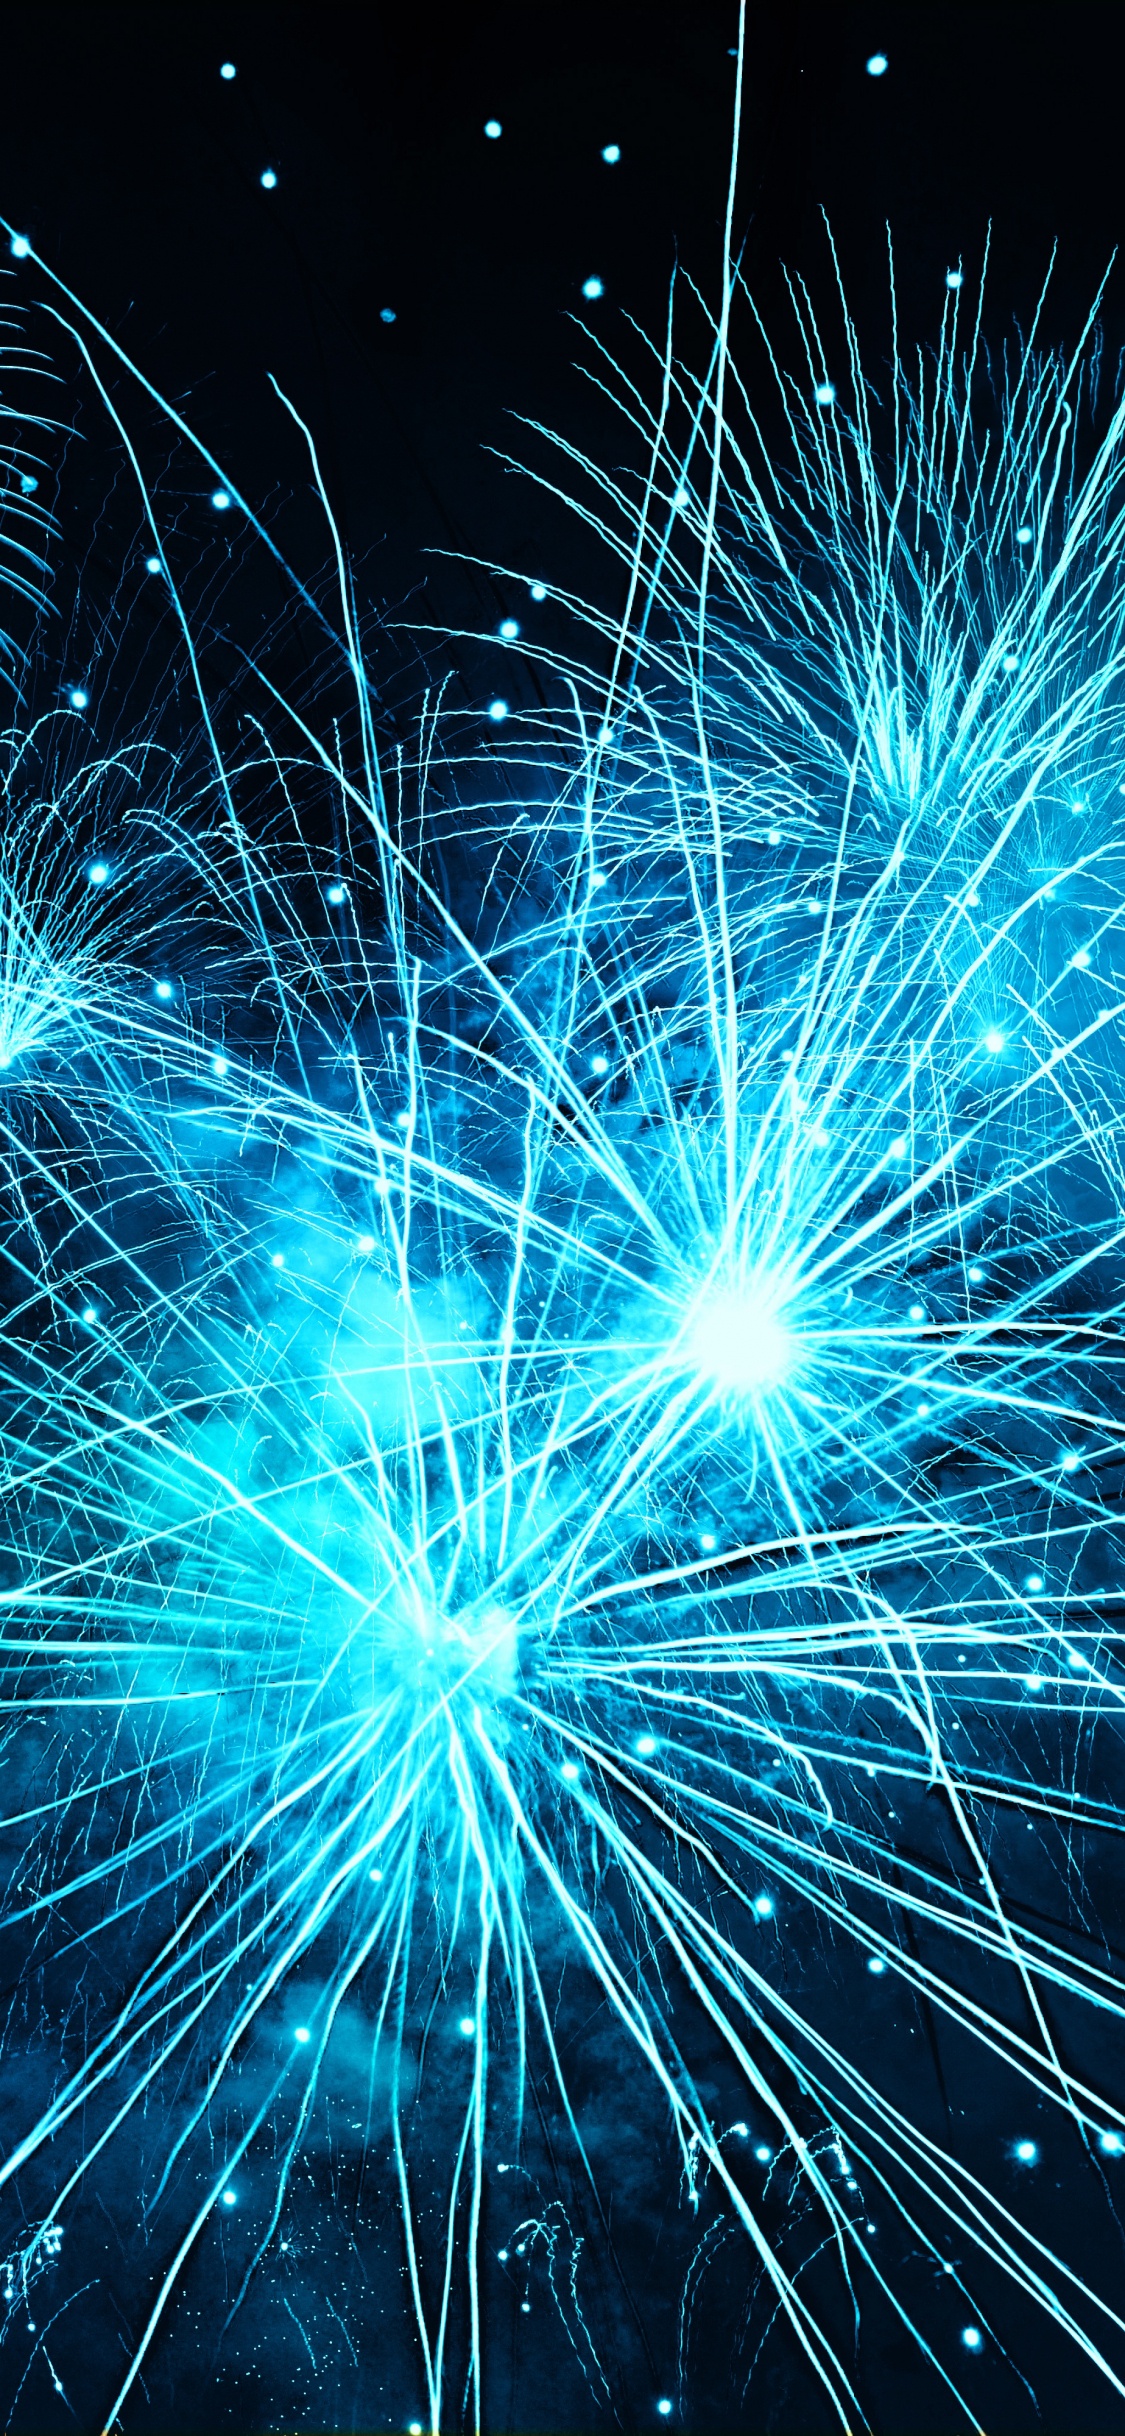 New Years Eve, New Year, New Years Day, Party, Fireworks. Wallpaper in 1125x2436 Resolution